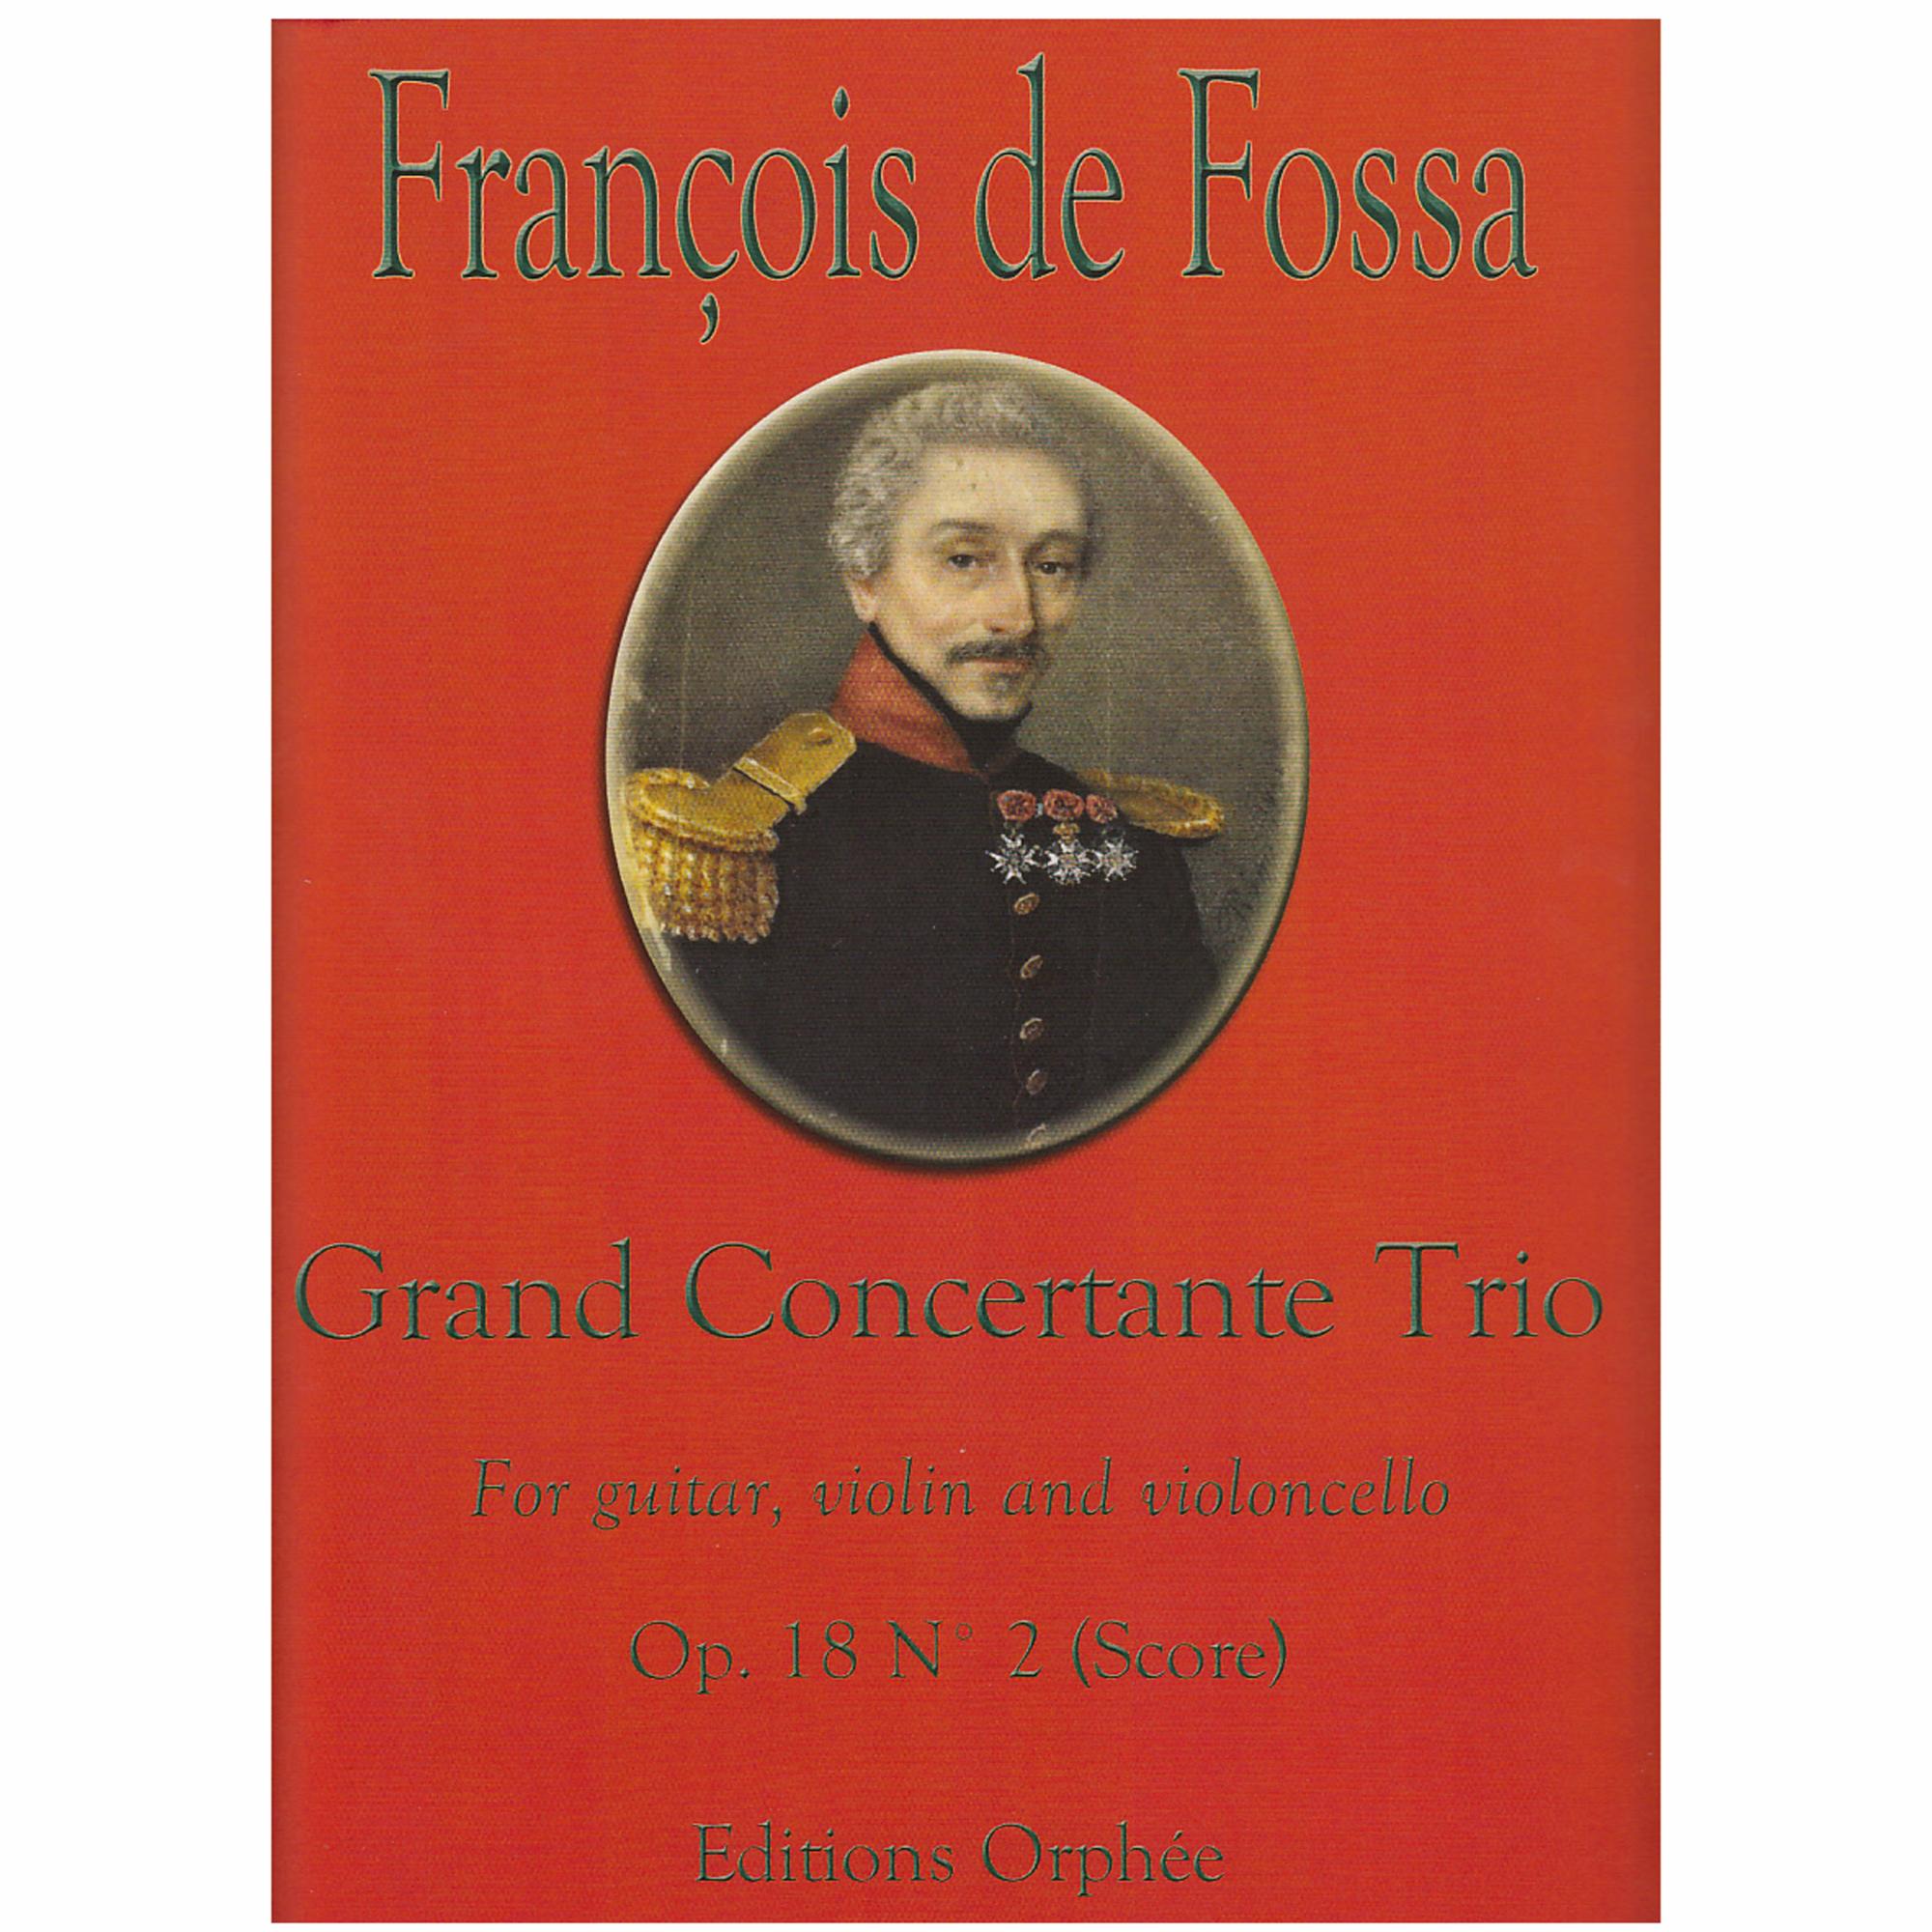 Grand Concertante Trio Op. 18 N0. 2 for Guitar, Violin and Cello